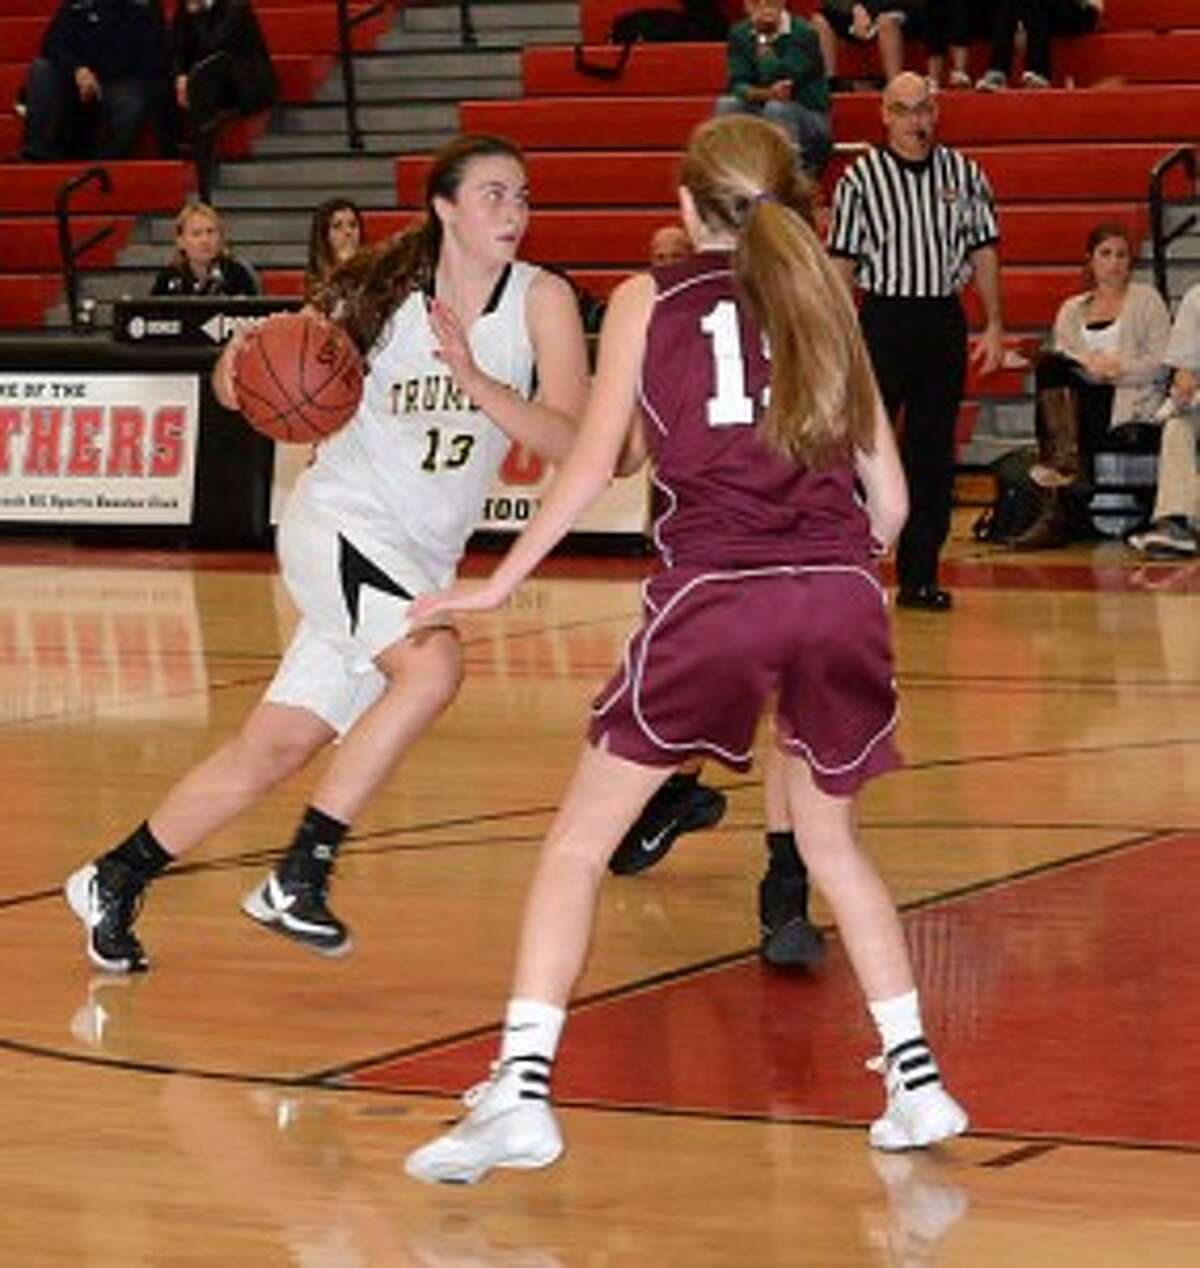 The Trumbull High girls varsity basketball team will play St. Joseph at 6 p.m. in the lidlifter of the 9th annual Officials vs Cancer fundraiser at Fairfield University on Saturday, Jan. 9. — Andy Hutchison photo